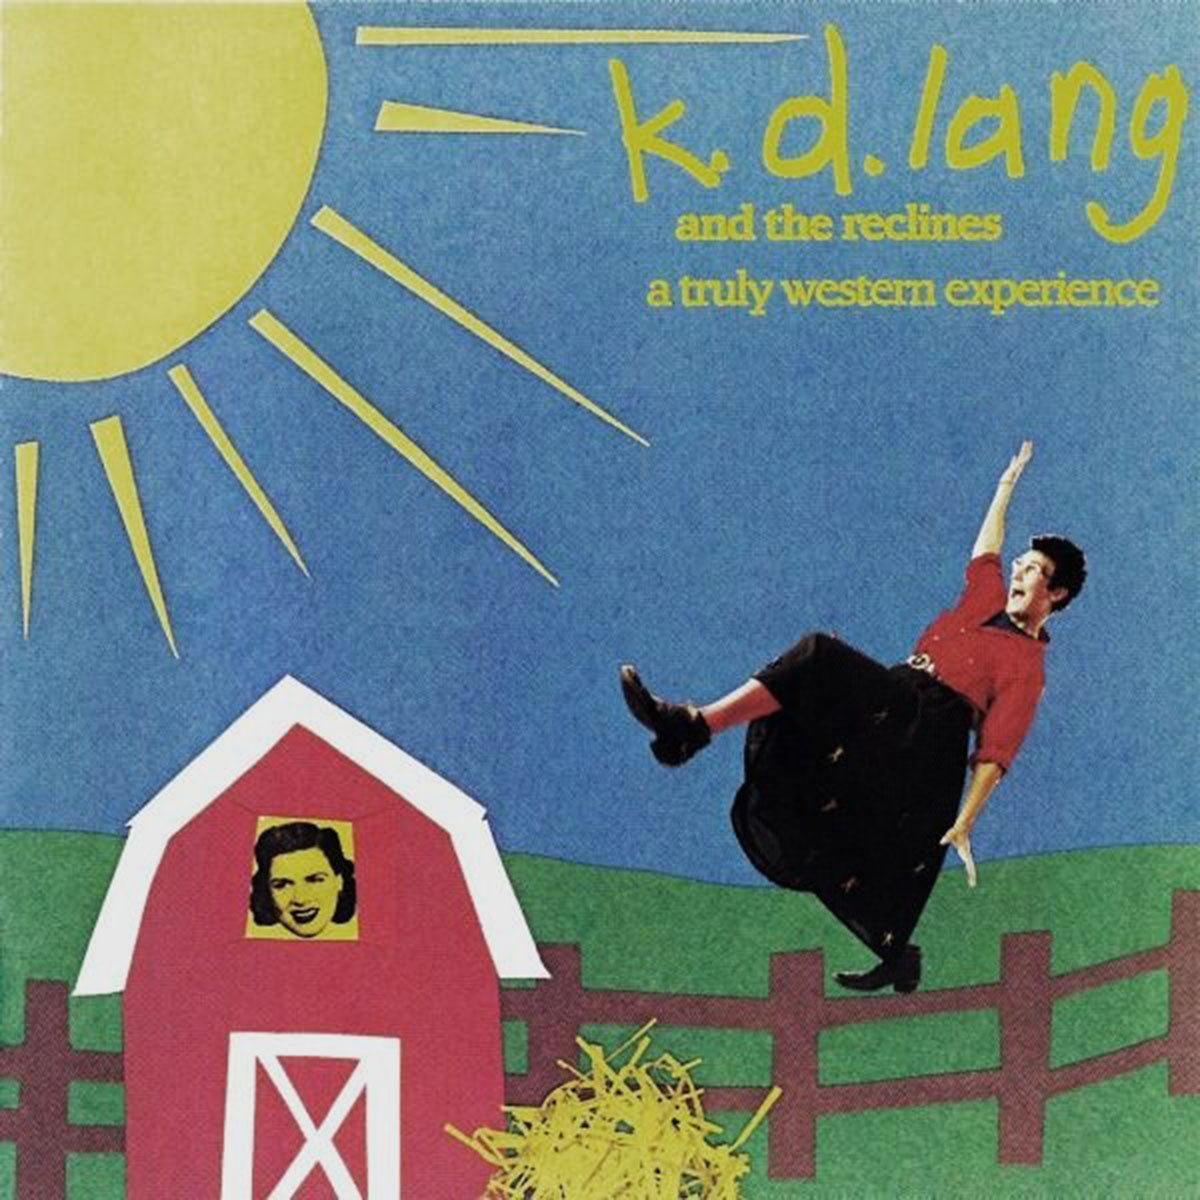 kd lang and the reclines – A Truly Western Experience